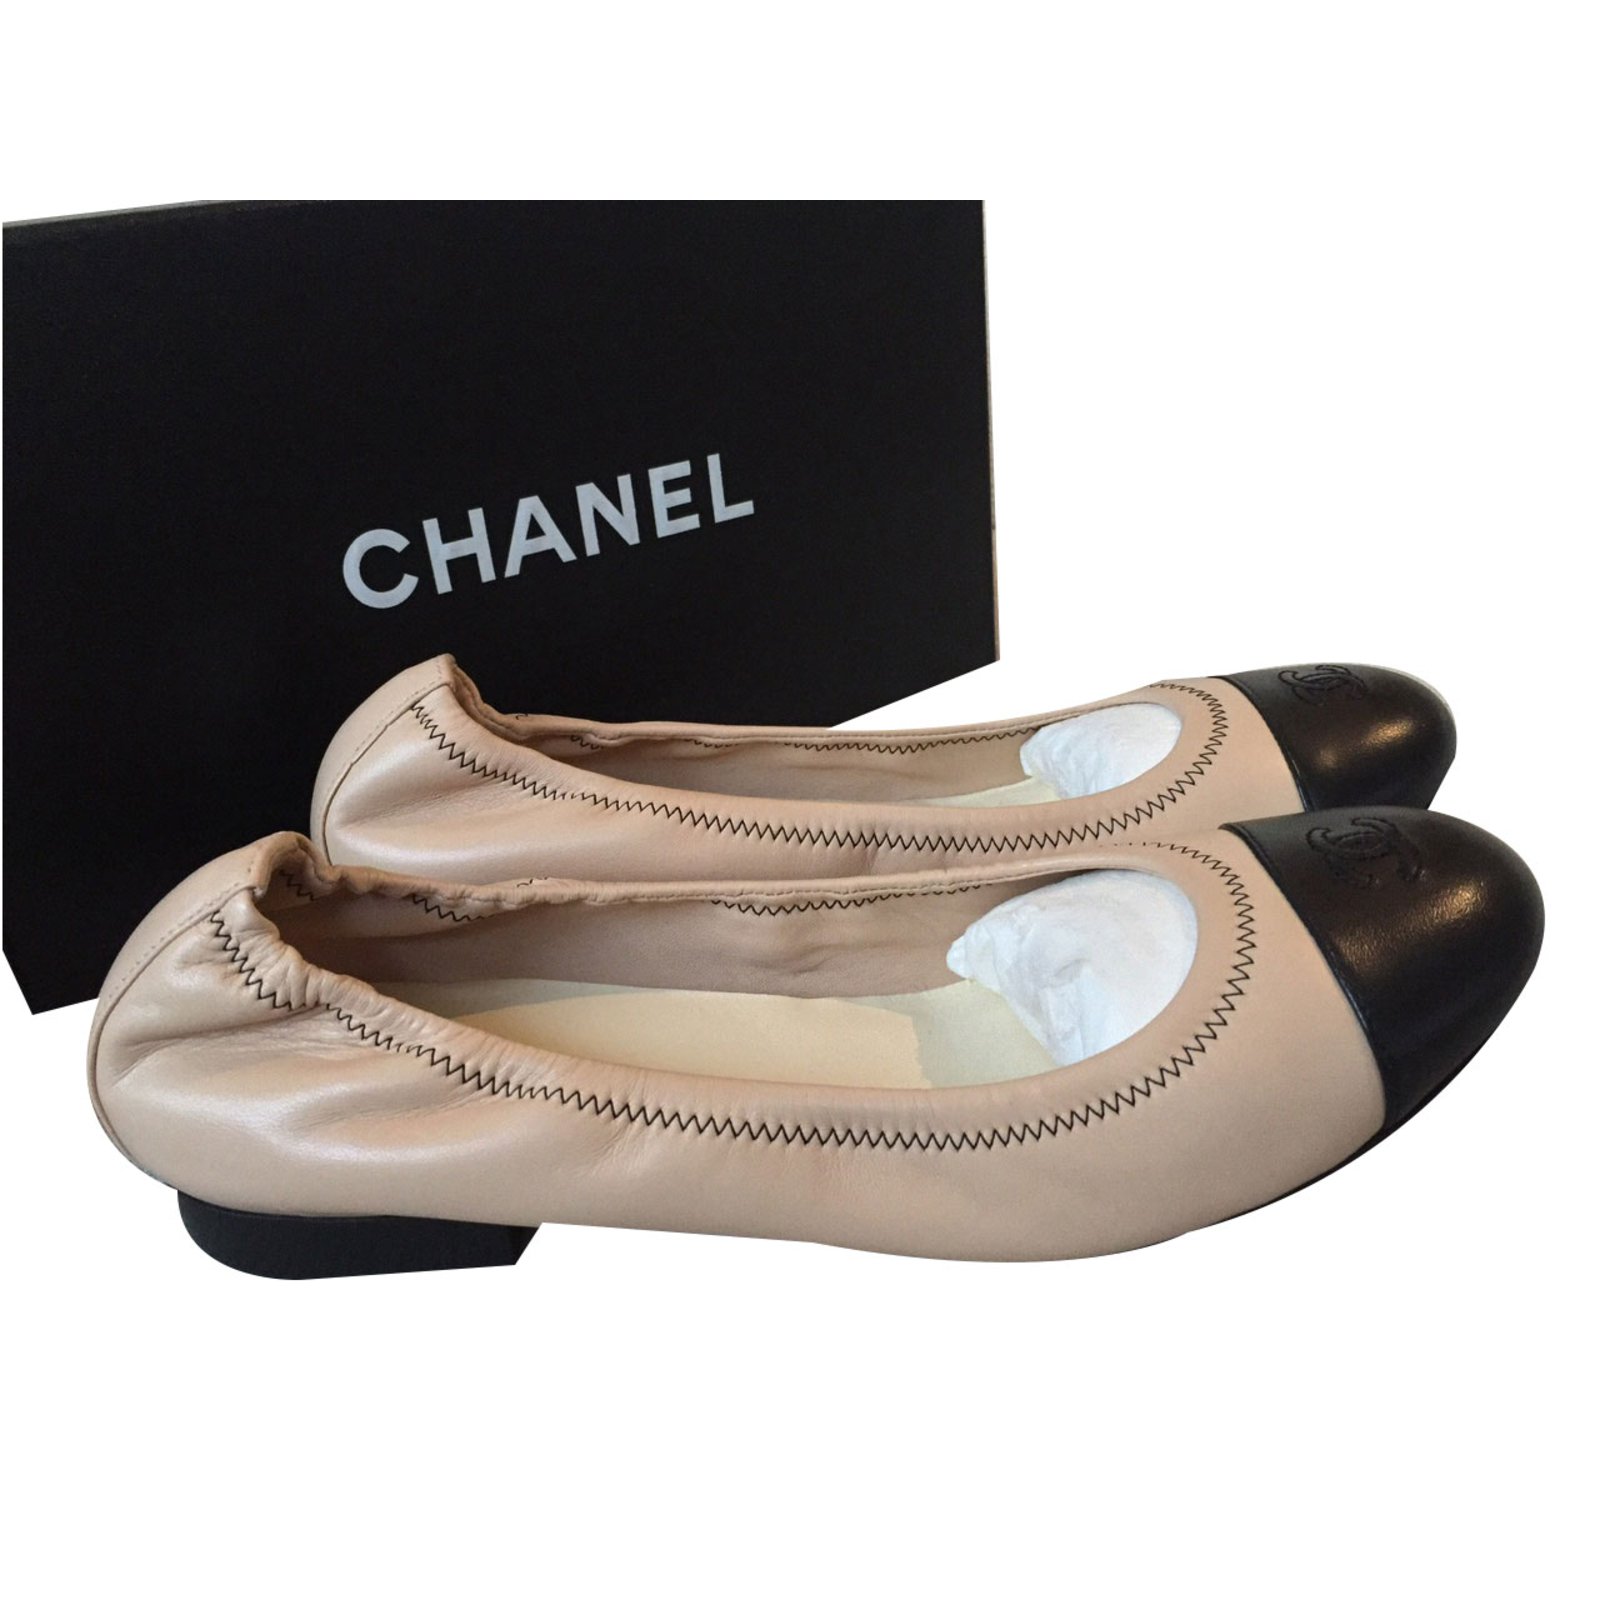 Leather ballet flats Chanel Black size 39.5 EU in Leather - 10875304